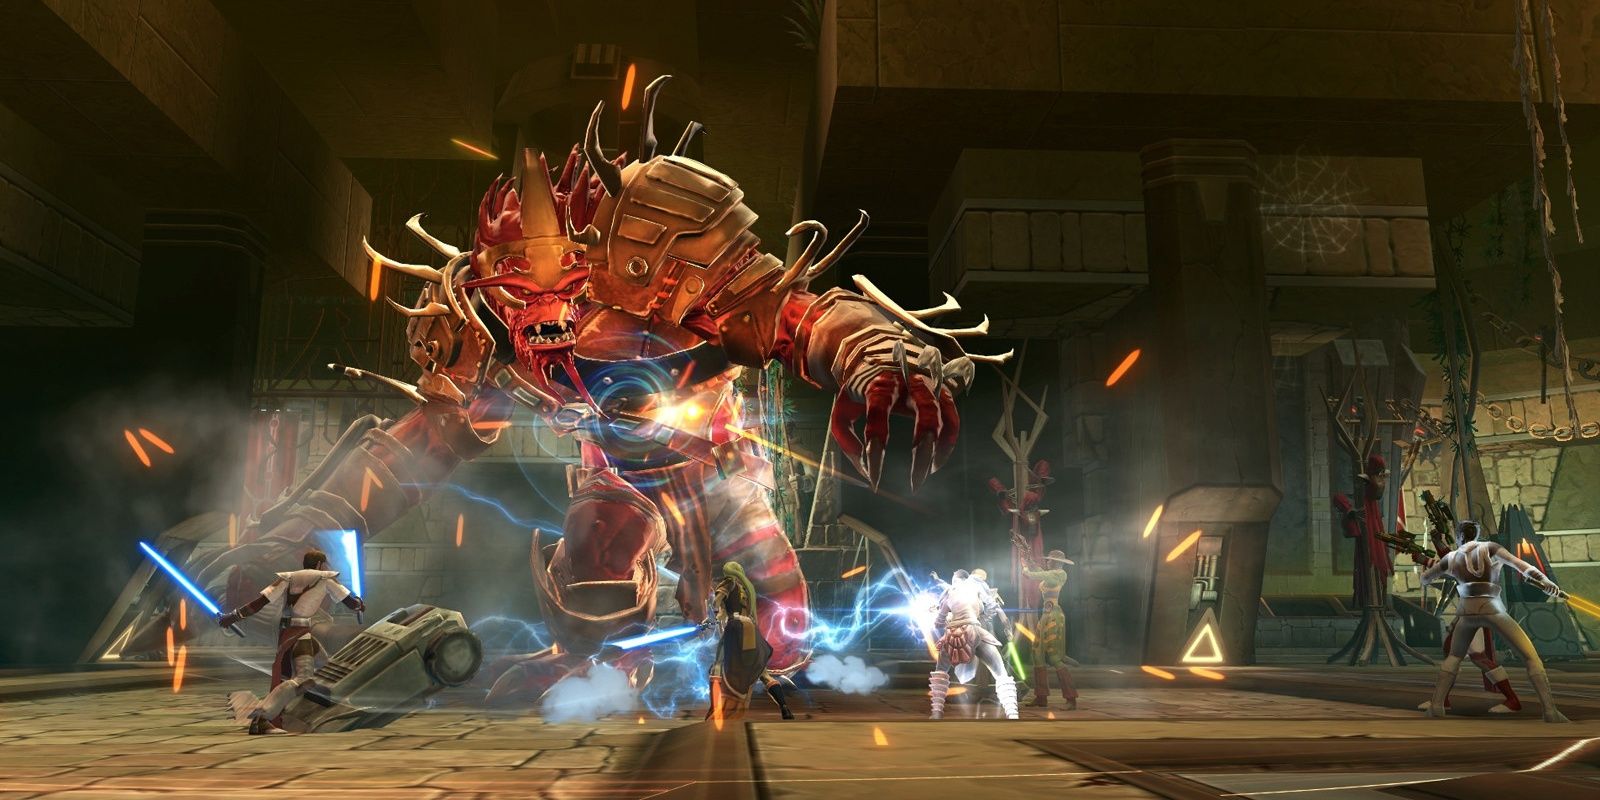 Image of gameplay from the trailer for Star Wars: The Old Republic.